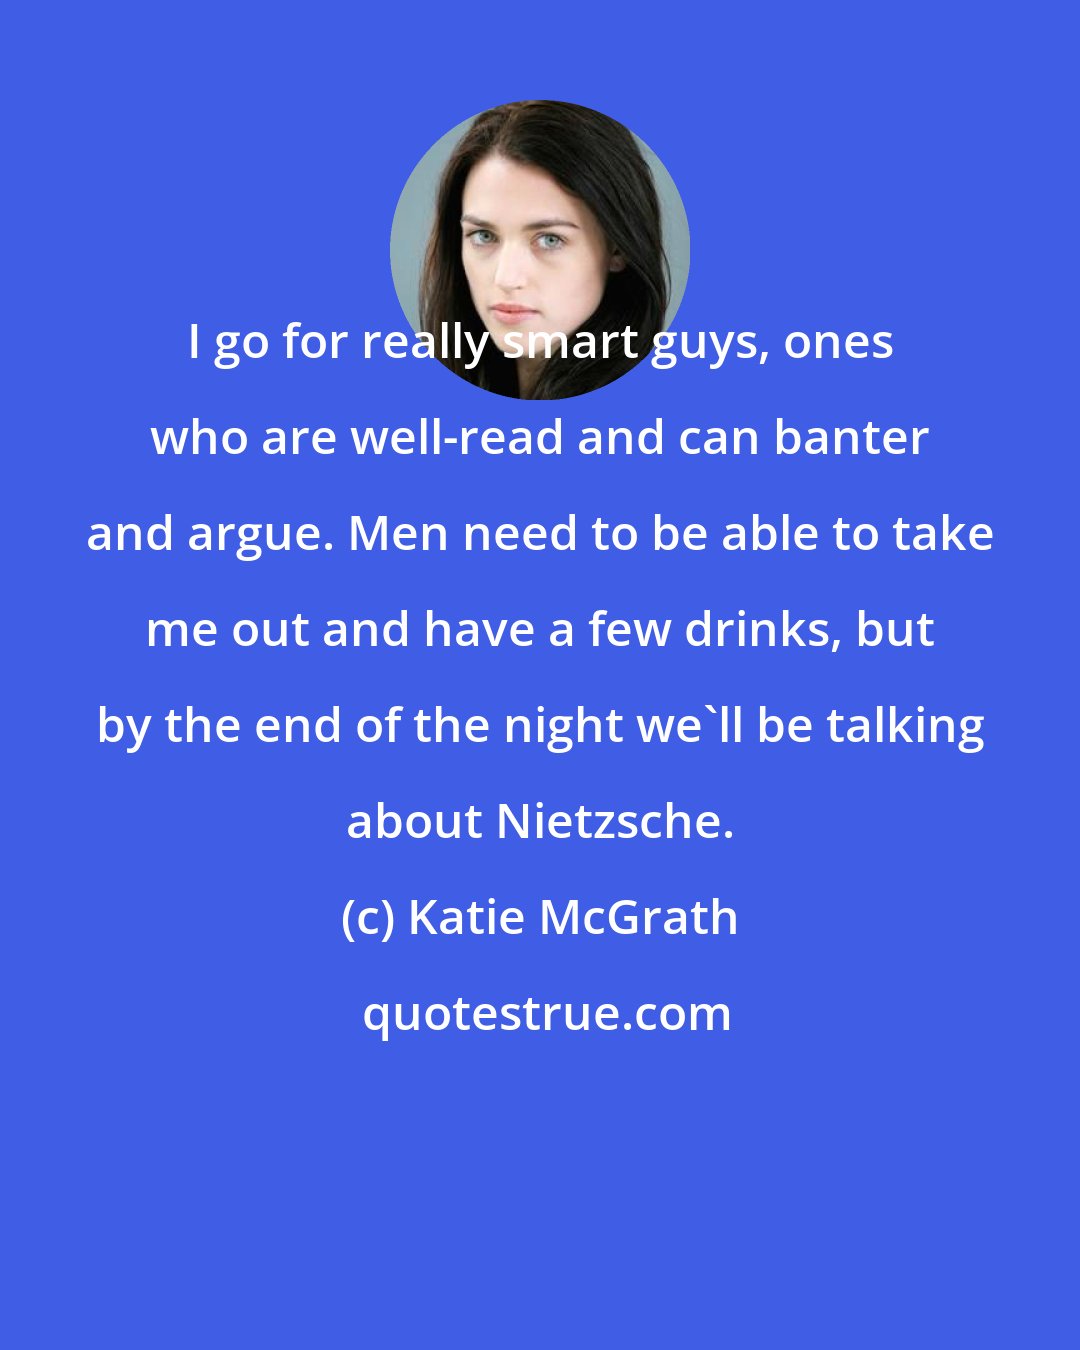 Katie McGrath: I go for really smart guys, ones who are well-read and can banter and argue. Men need to be able to take me out and have a few drinks, but by the end of the night we'll be talking about Nietzsche.